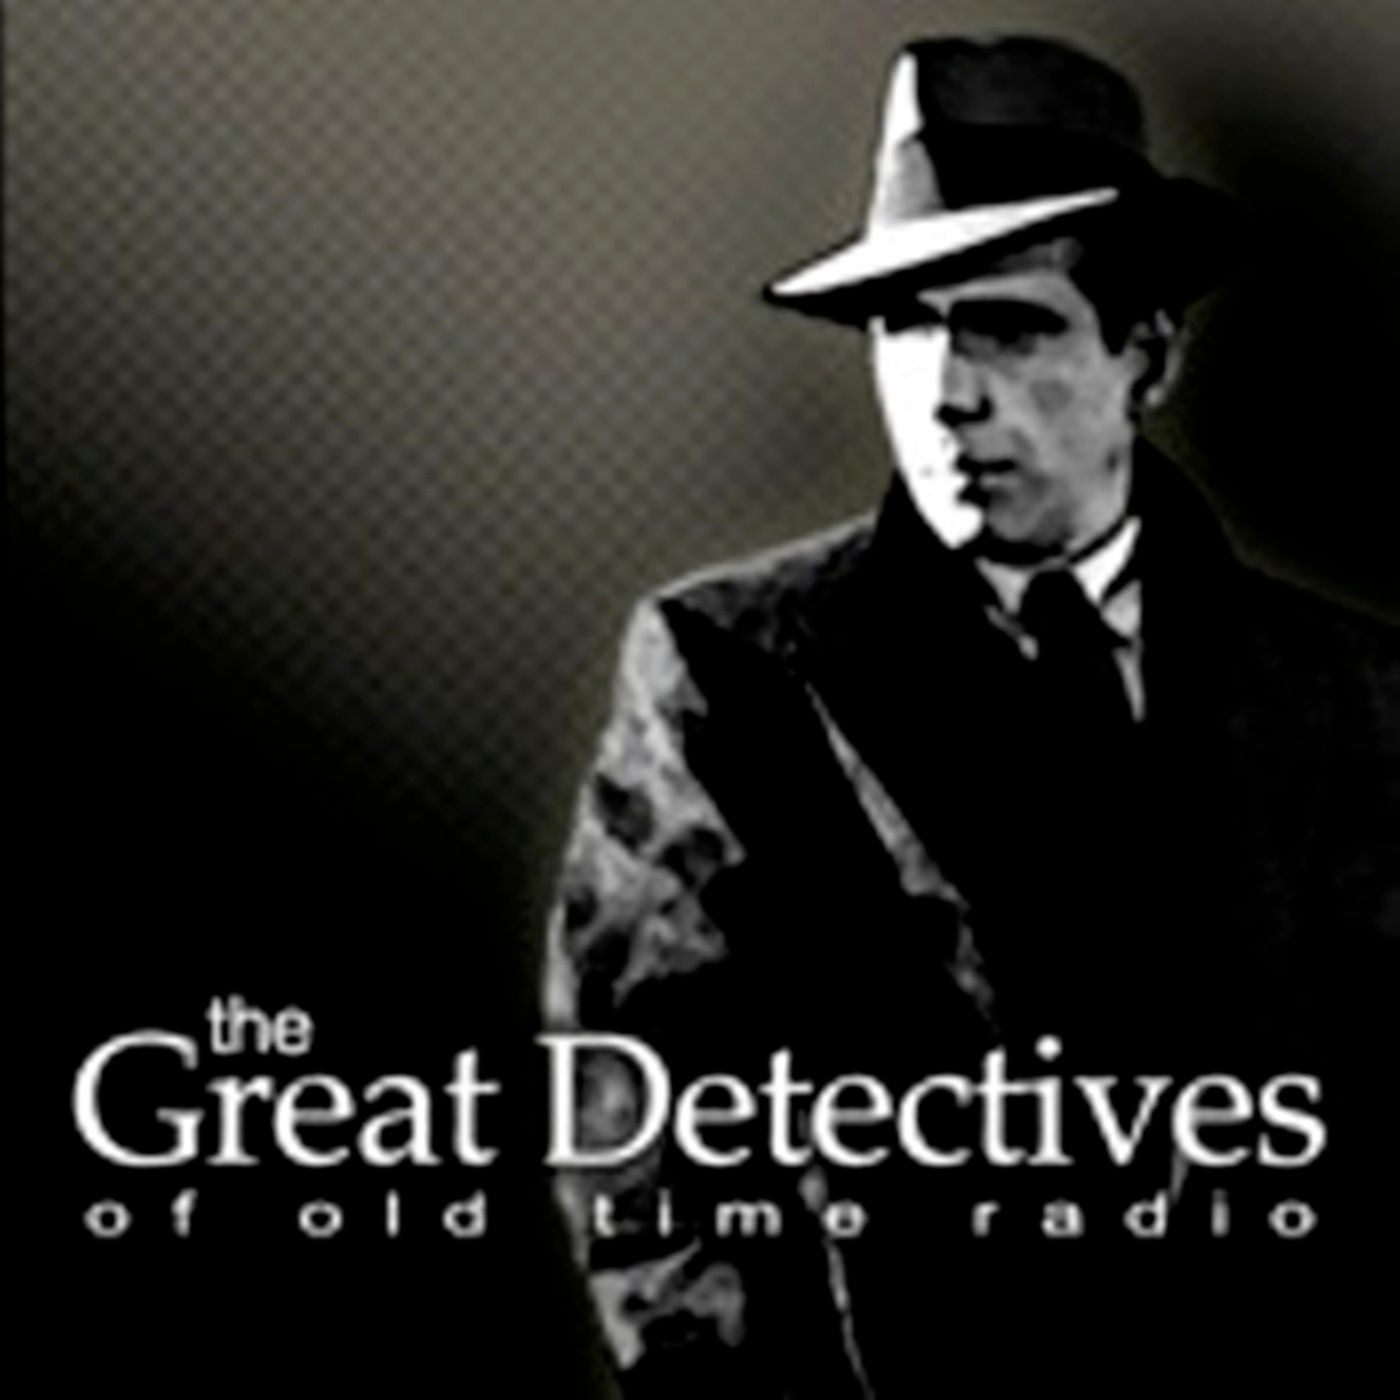 The Great Detectives of Old Time Radio:Adam Graham Radio Detective Podcasts